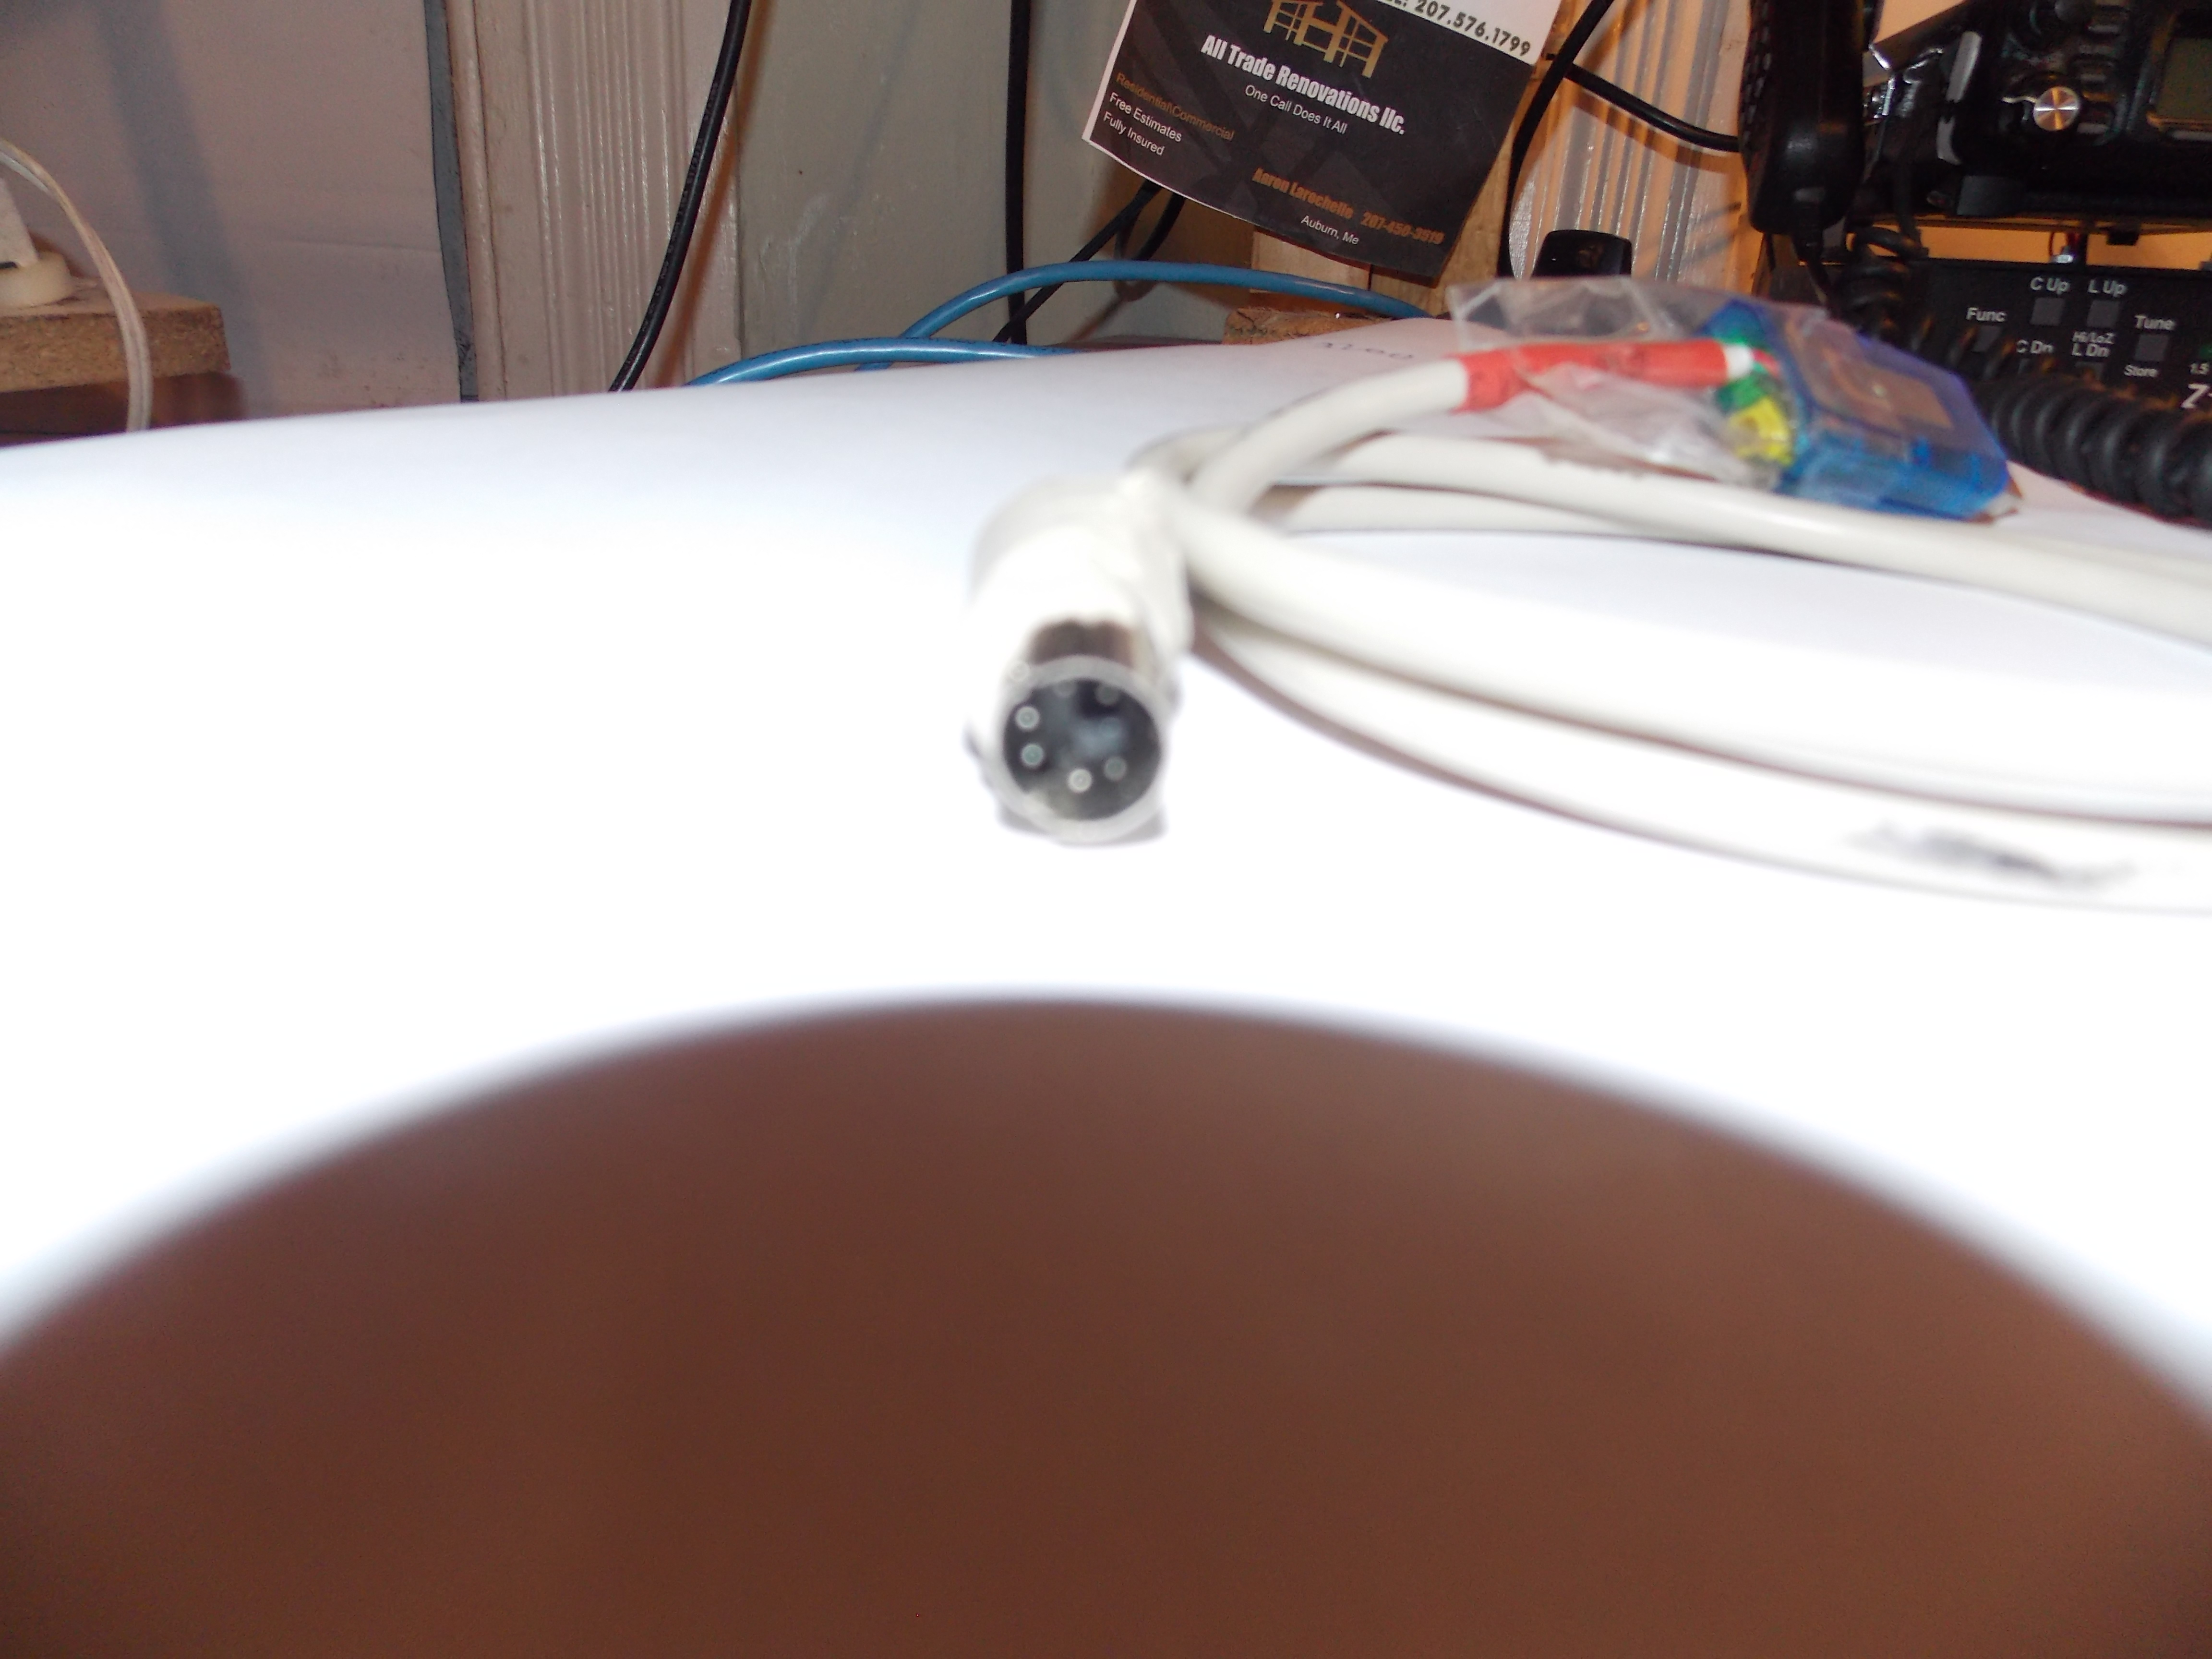 I cut the socket end off a PS/2 keyboard extension an solder three wire directly to the usb sound adapter.